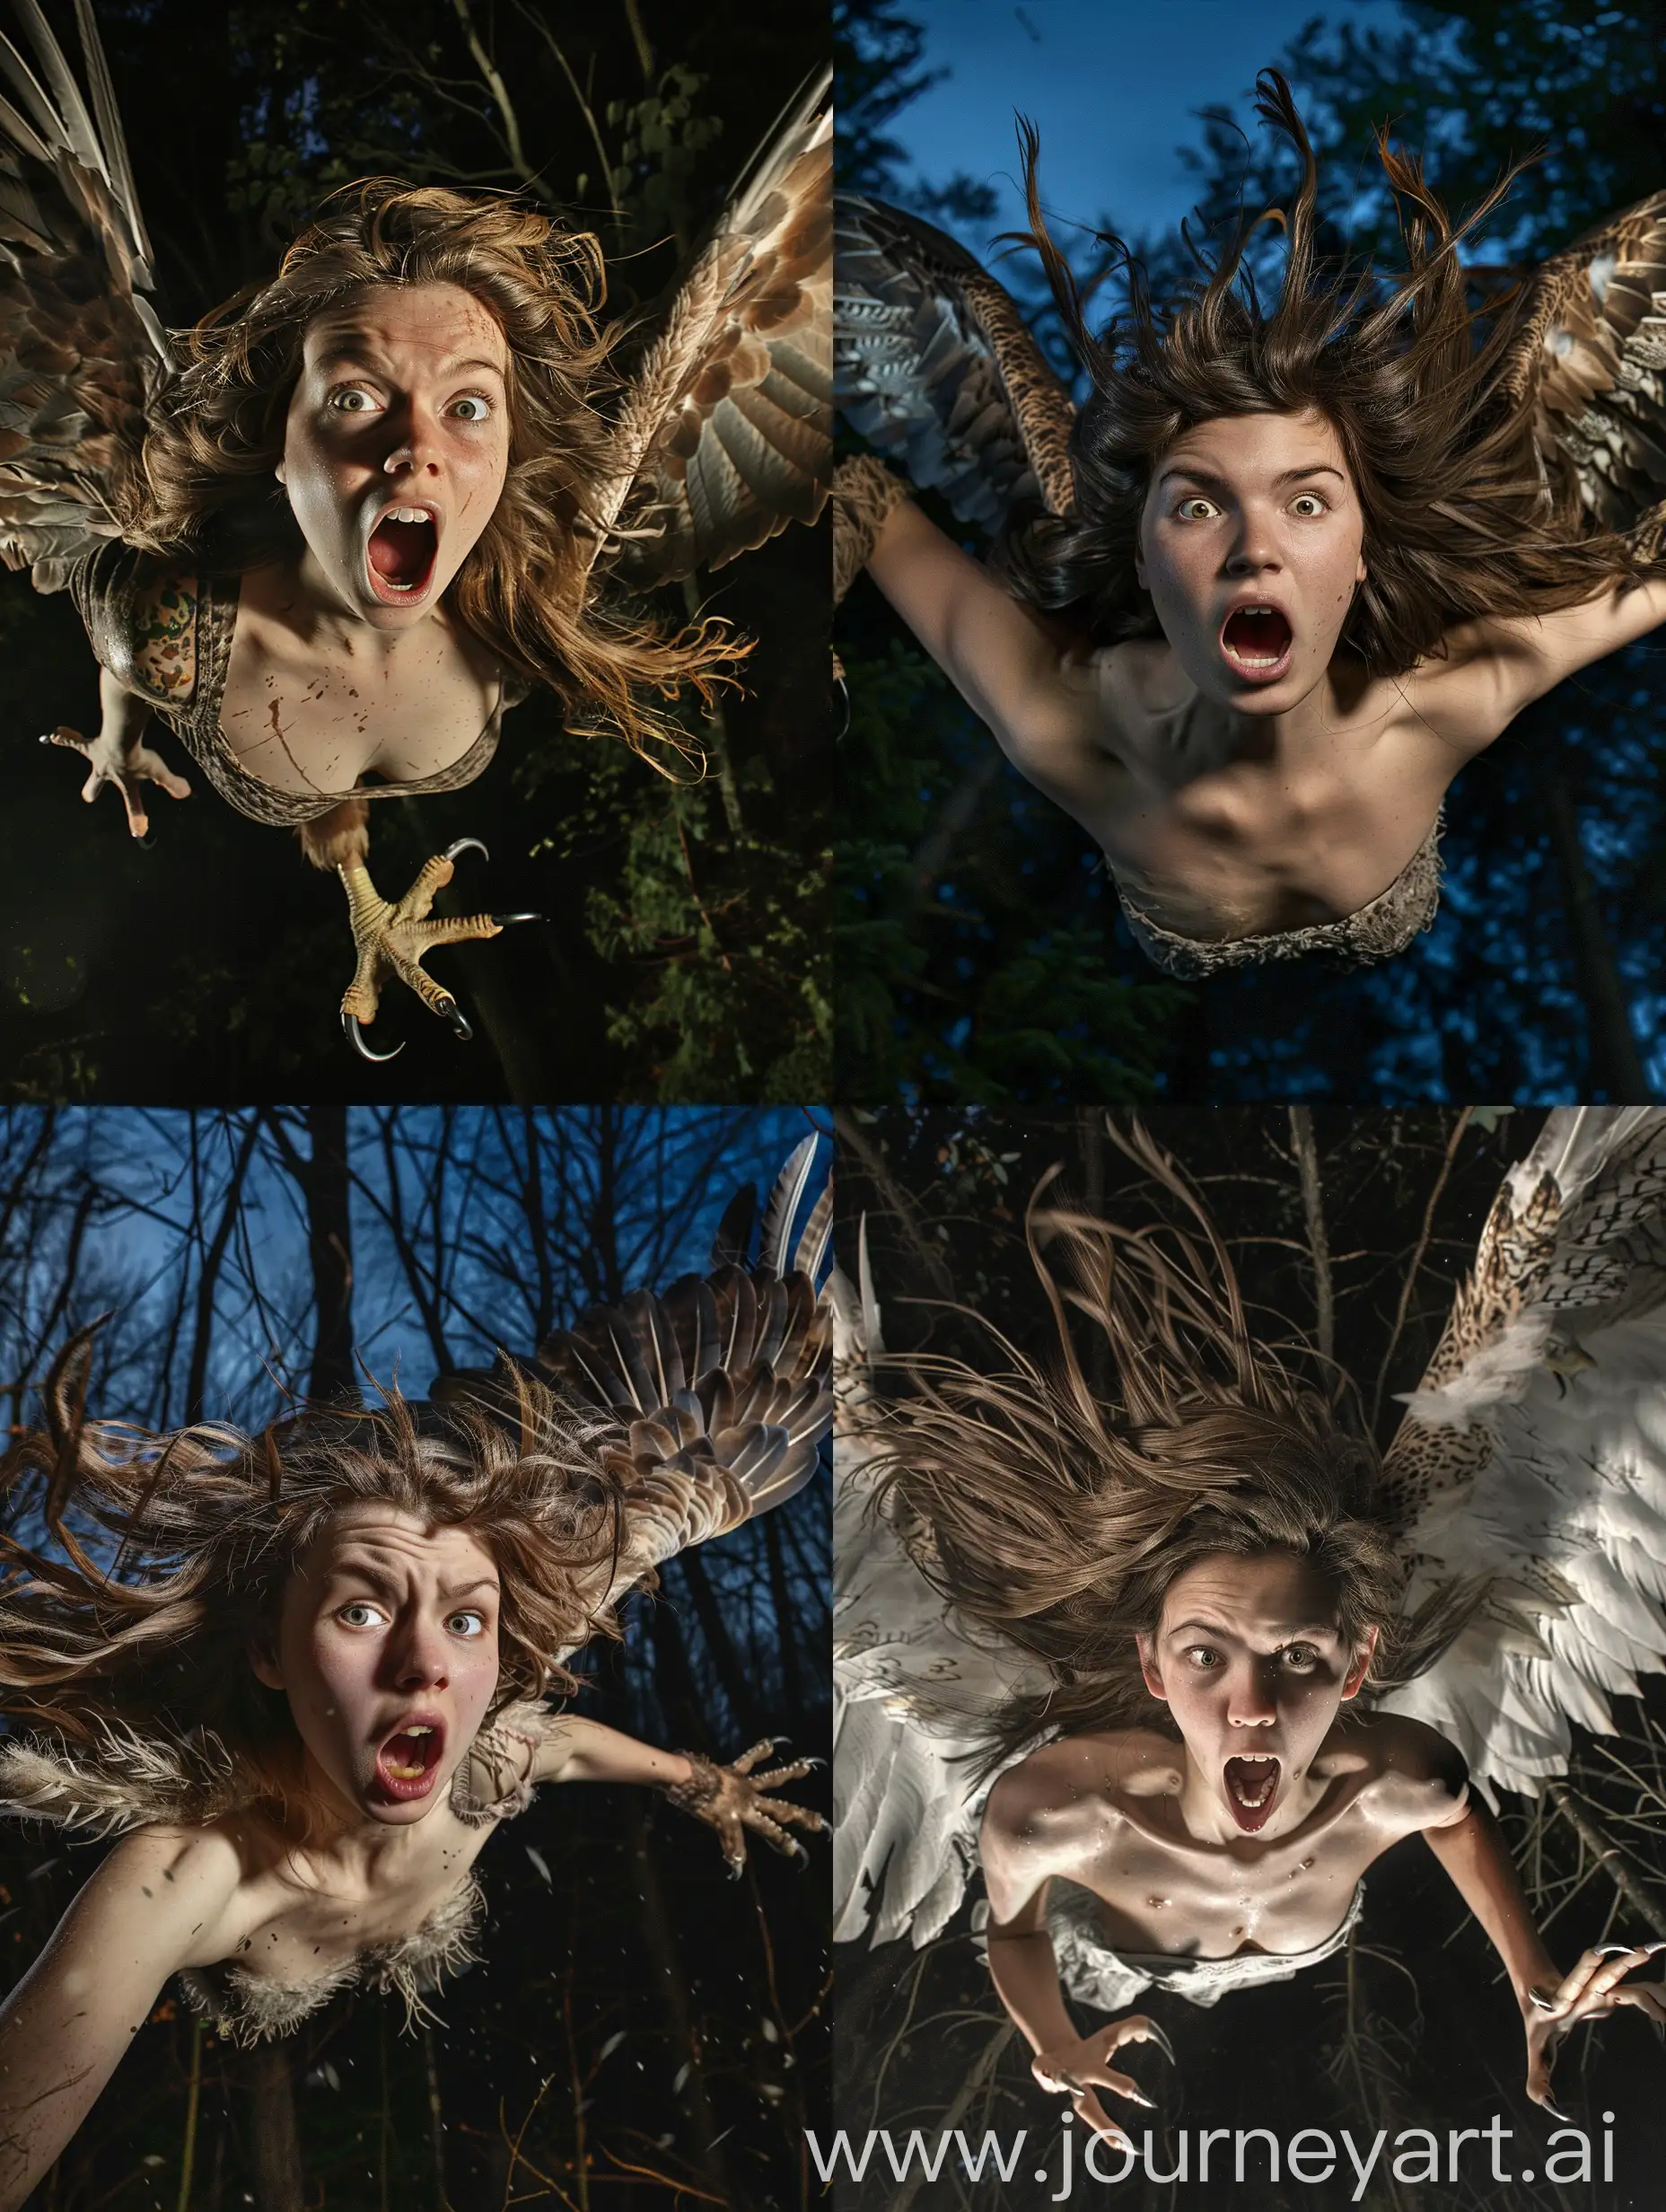 Desperate-Young-Woman-Transformed-into-Eagle-Screaming-for-Help-in-Night-Forest